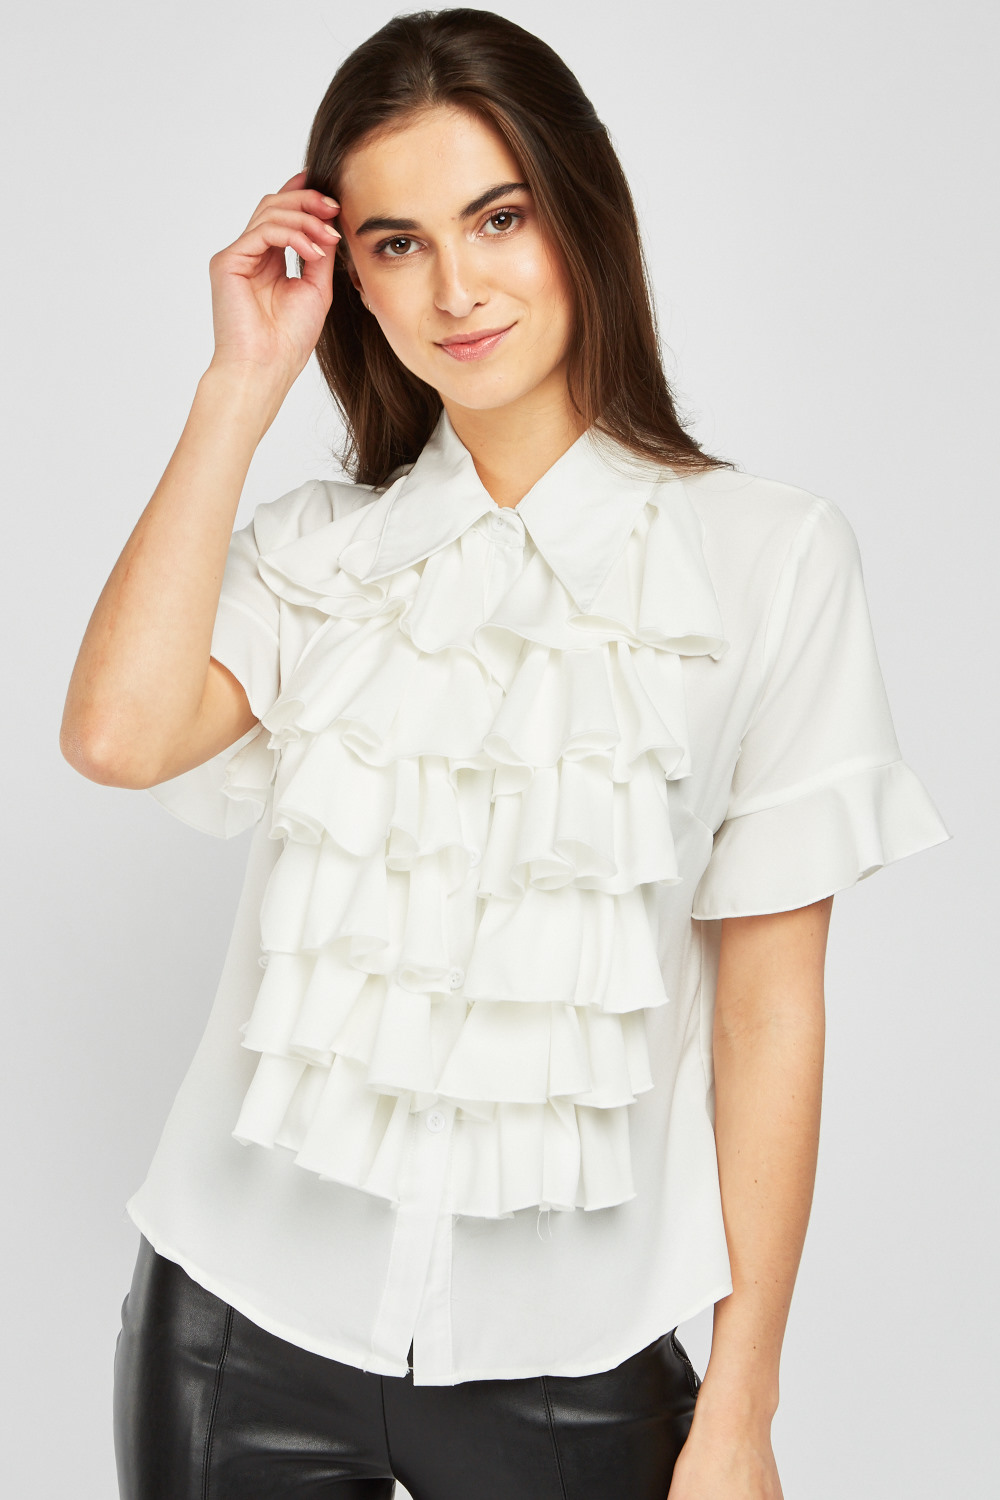 Layered Ruffle Front Blouse - Just $7